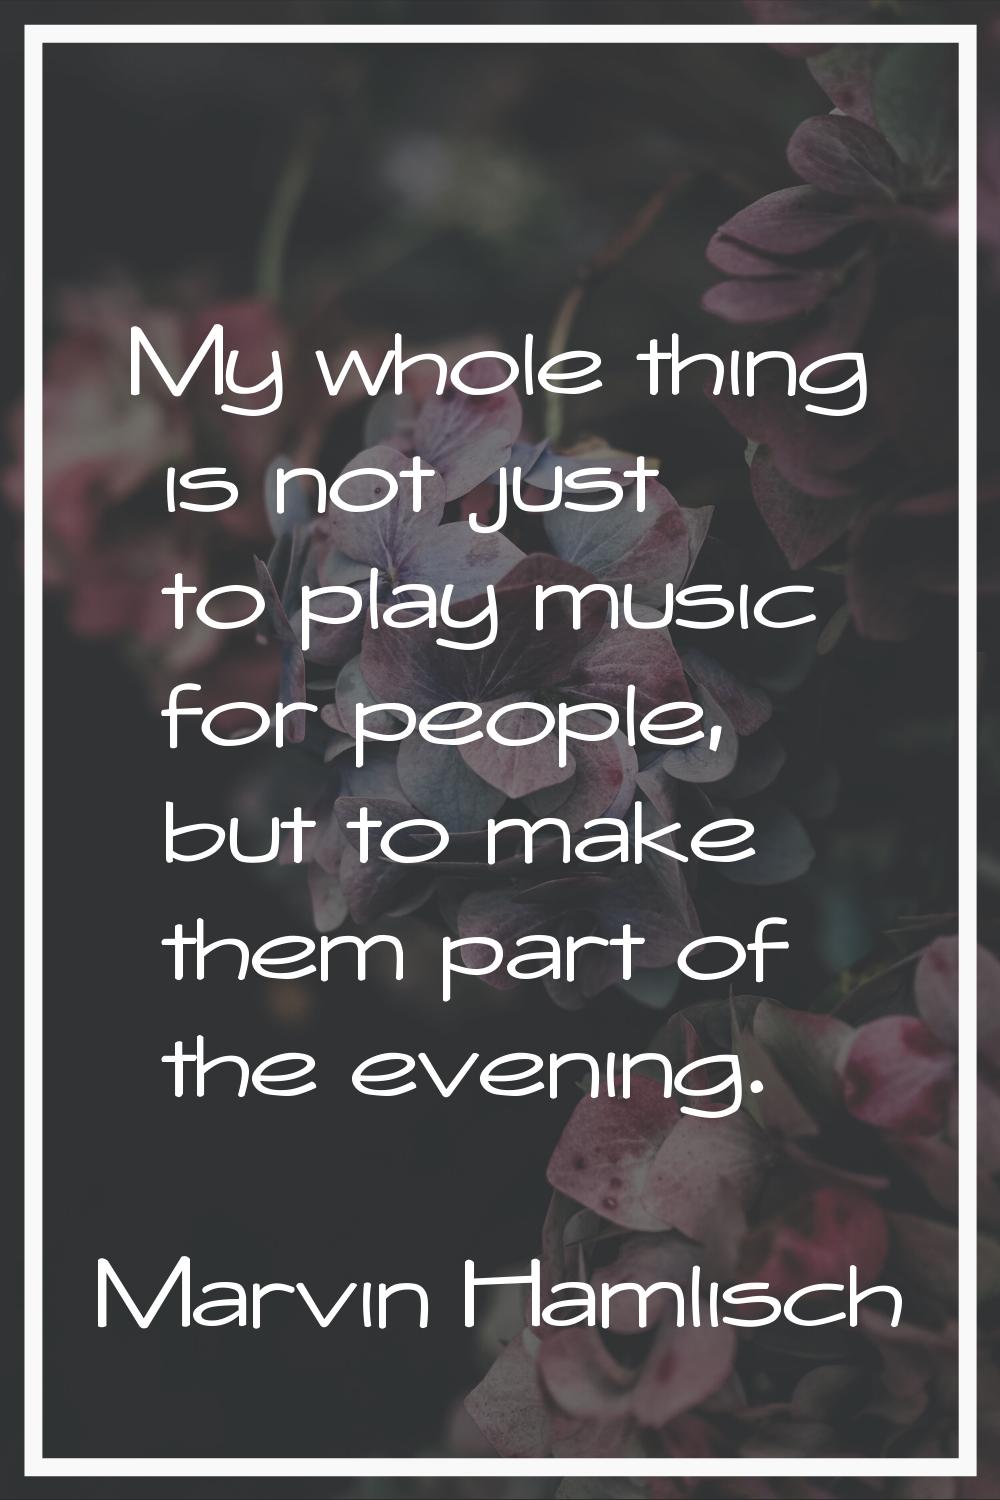 My whole thing is not just to play music for people, but to make them part of the evening.